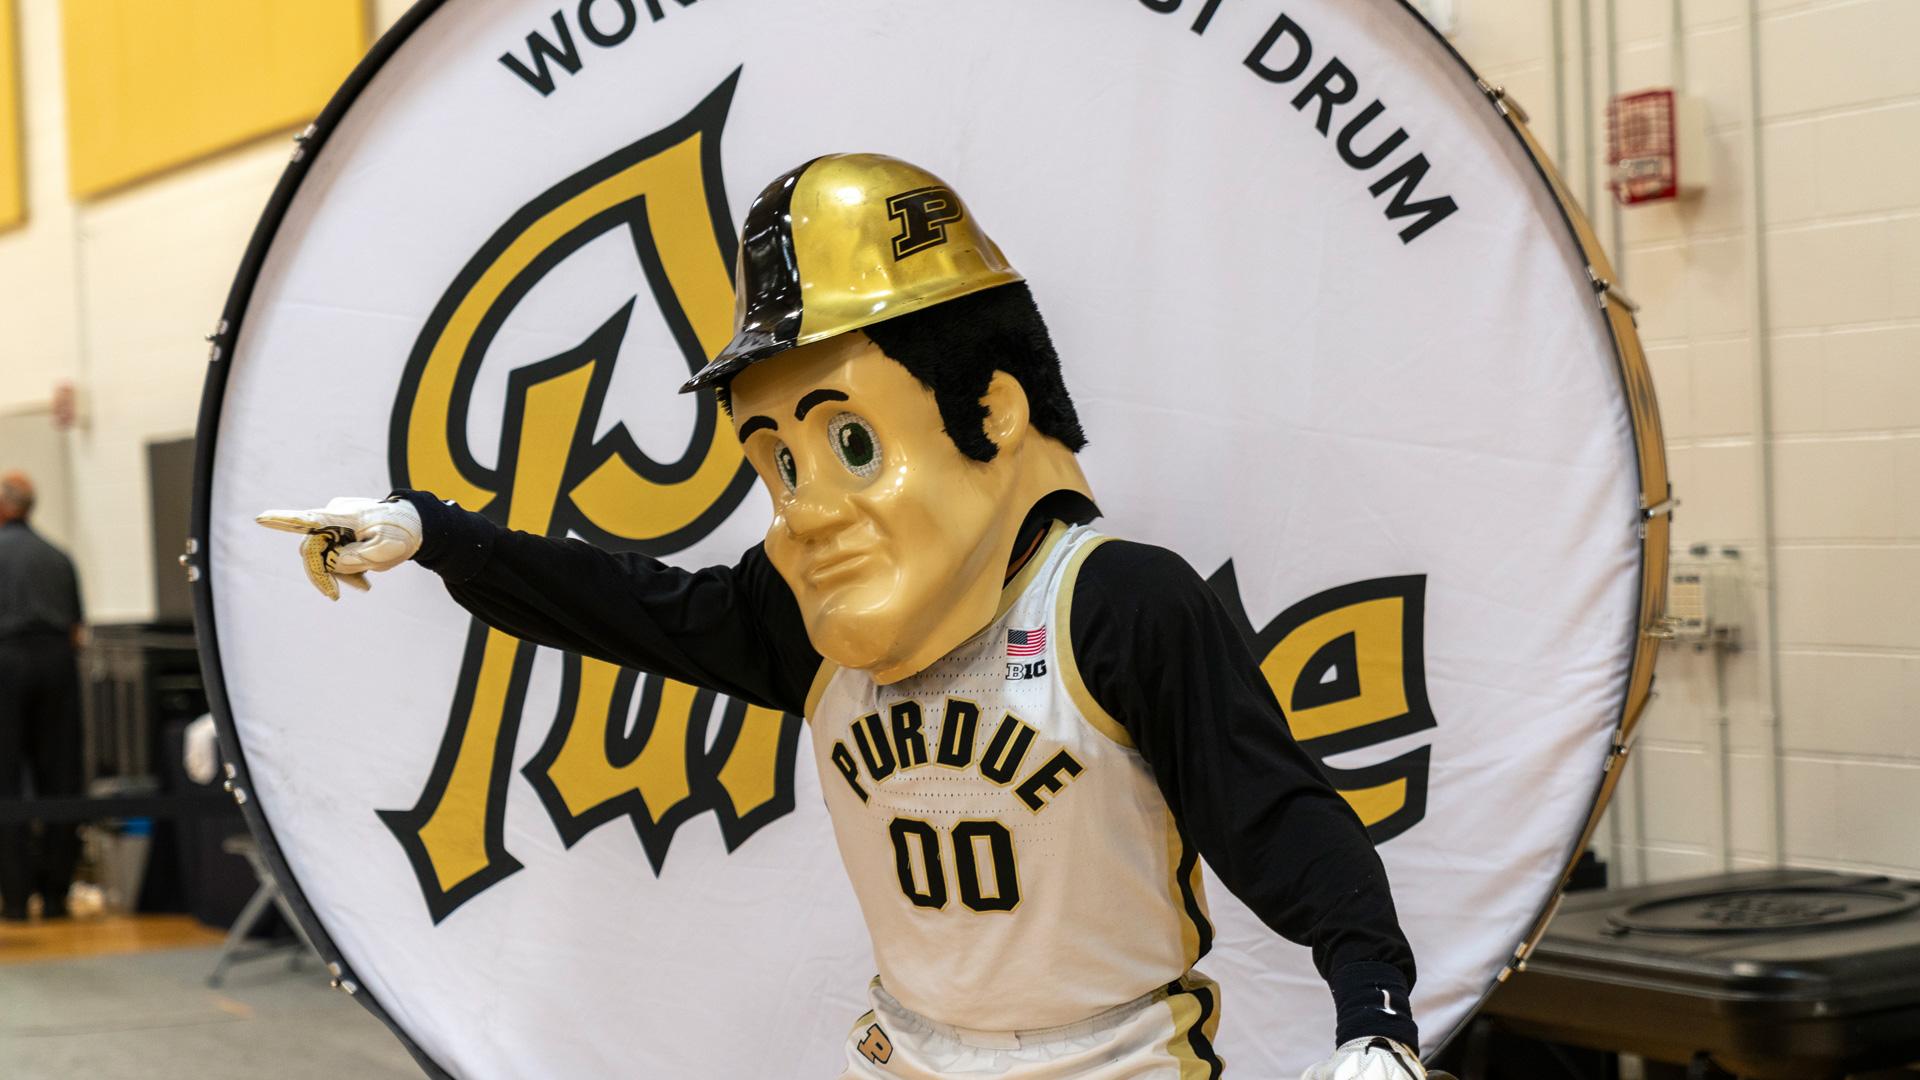 Purdue Pete and the World's Biggest Drum.